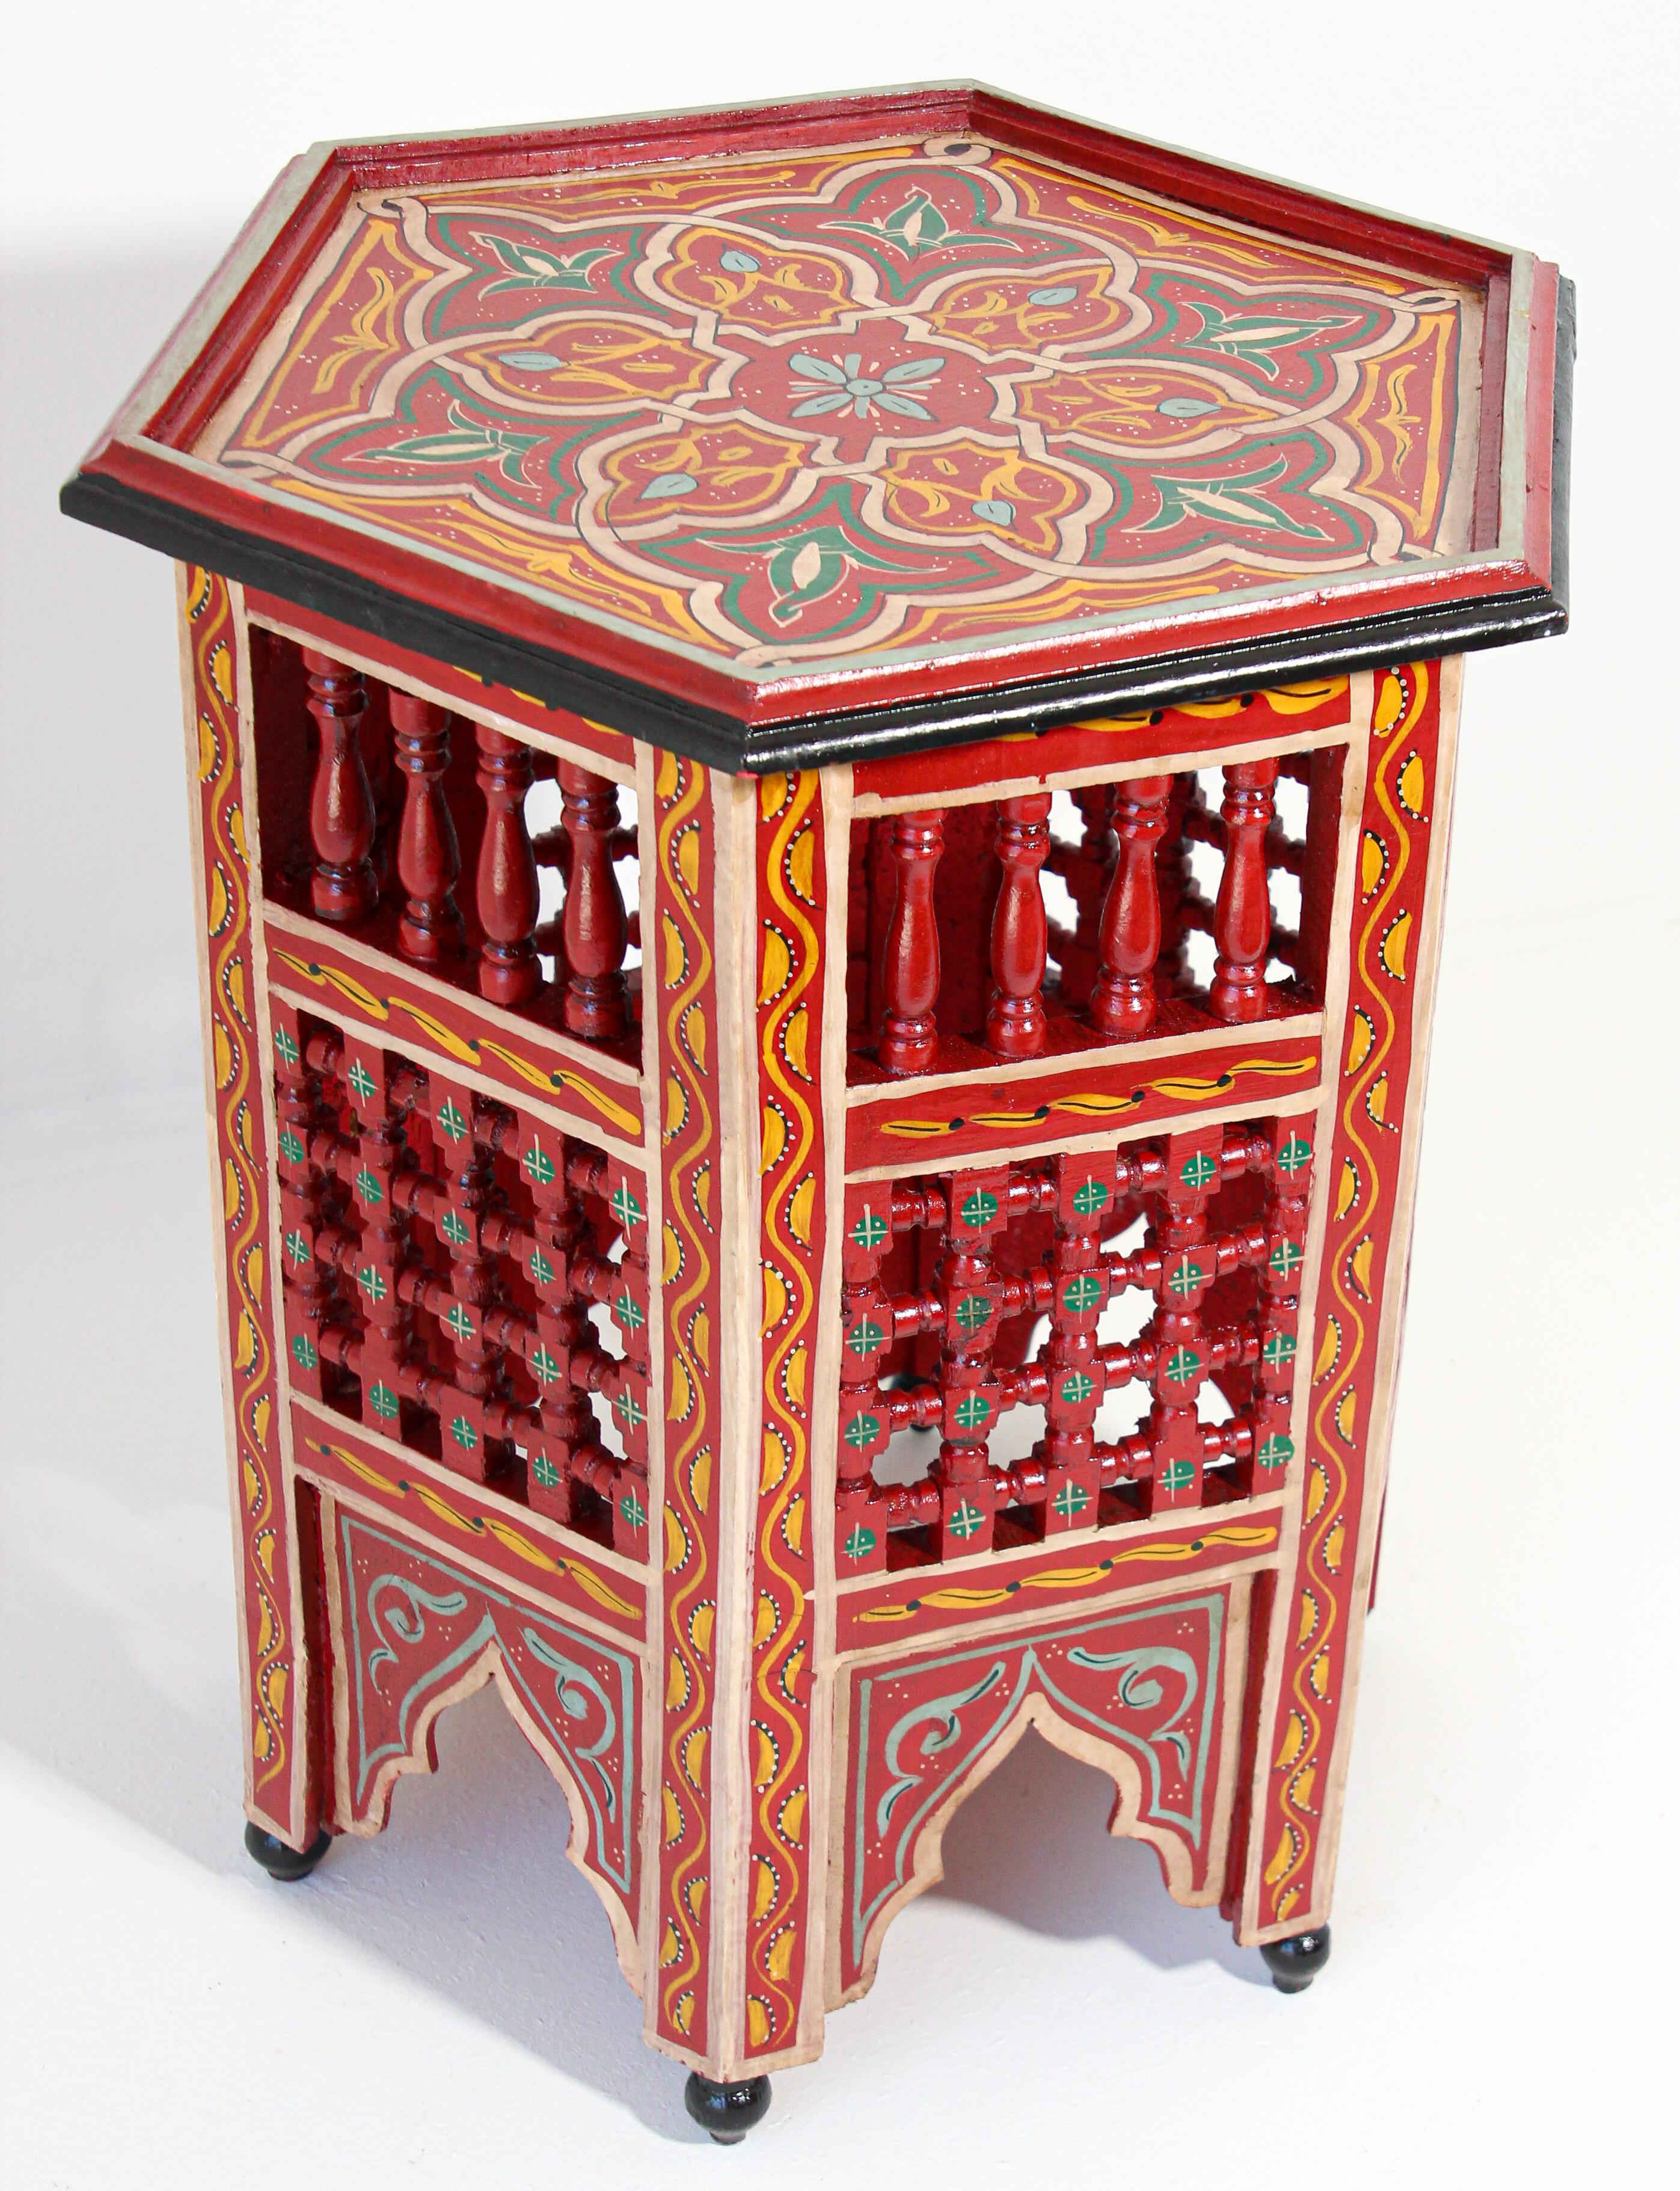 Moroccan red handcrafted and hand painted side table.
Moucharabie fret work octagonal stool with Moorish arches.
Handcrafted in Hispano Moresque style and hand painted on red color background with wine, aqua, green and ochre Moorish floral and